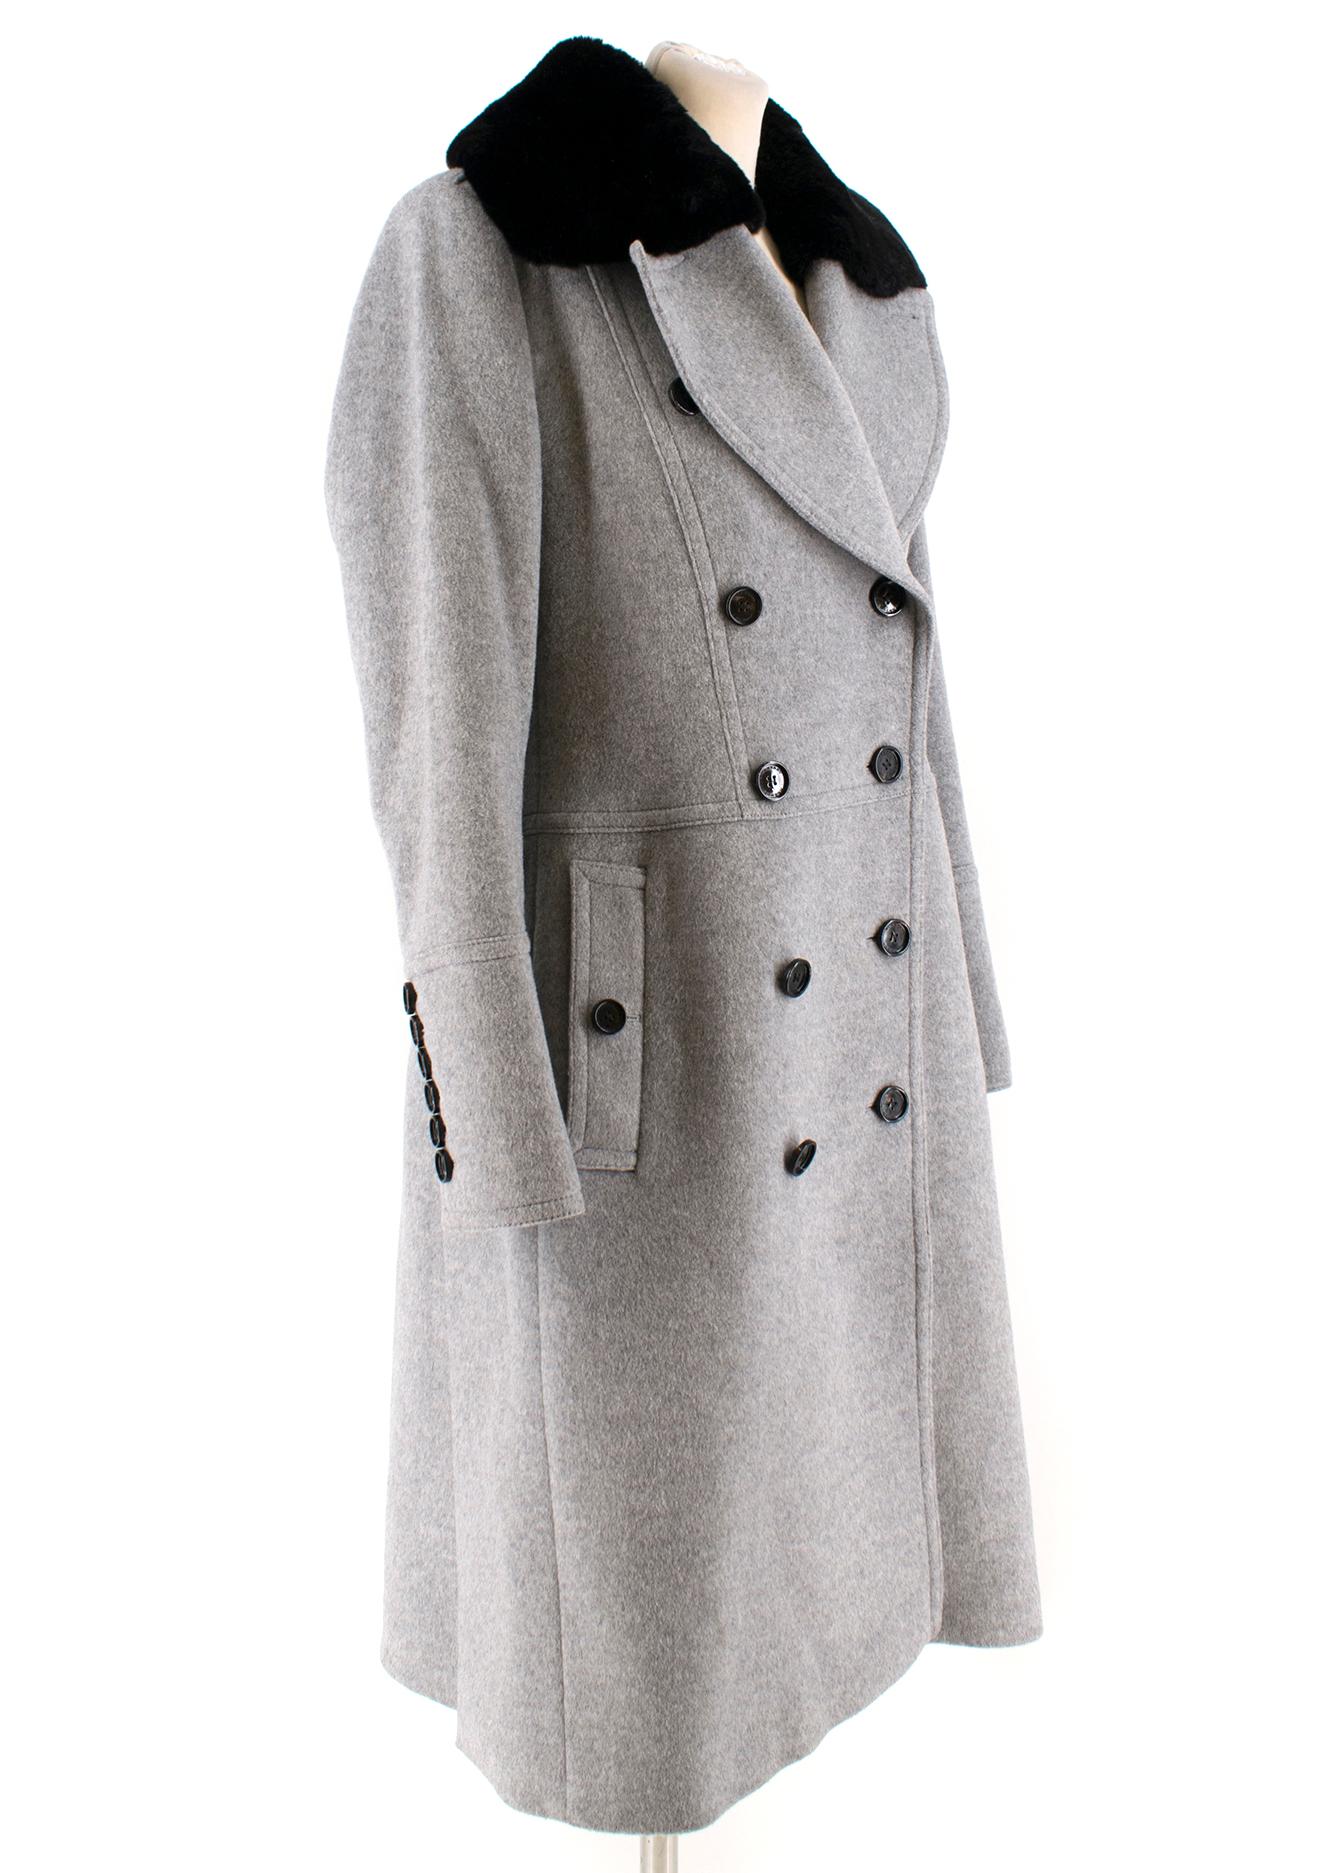 Burberry Grey Wool and Cashmere Coat with Rabbit Fur Collar

-Grey thick coat 
-Detachable black rabbit fur collar
-Double breasted coat with black button closure
-Shoulder pads 
-Two front pockets
-Two side slits 
-Back pleating at the waistband